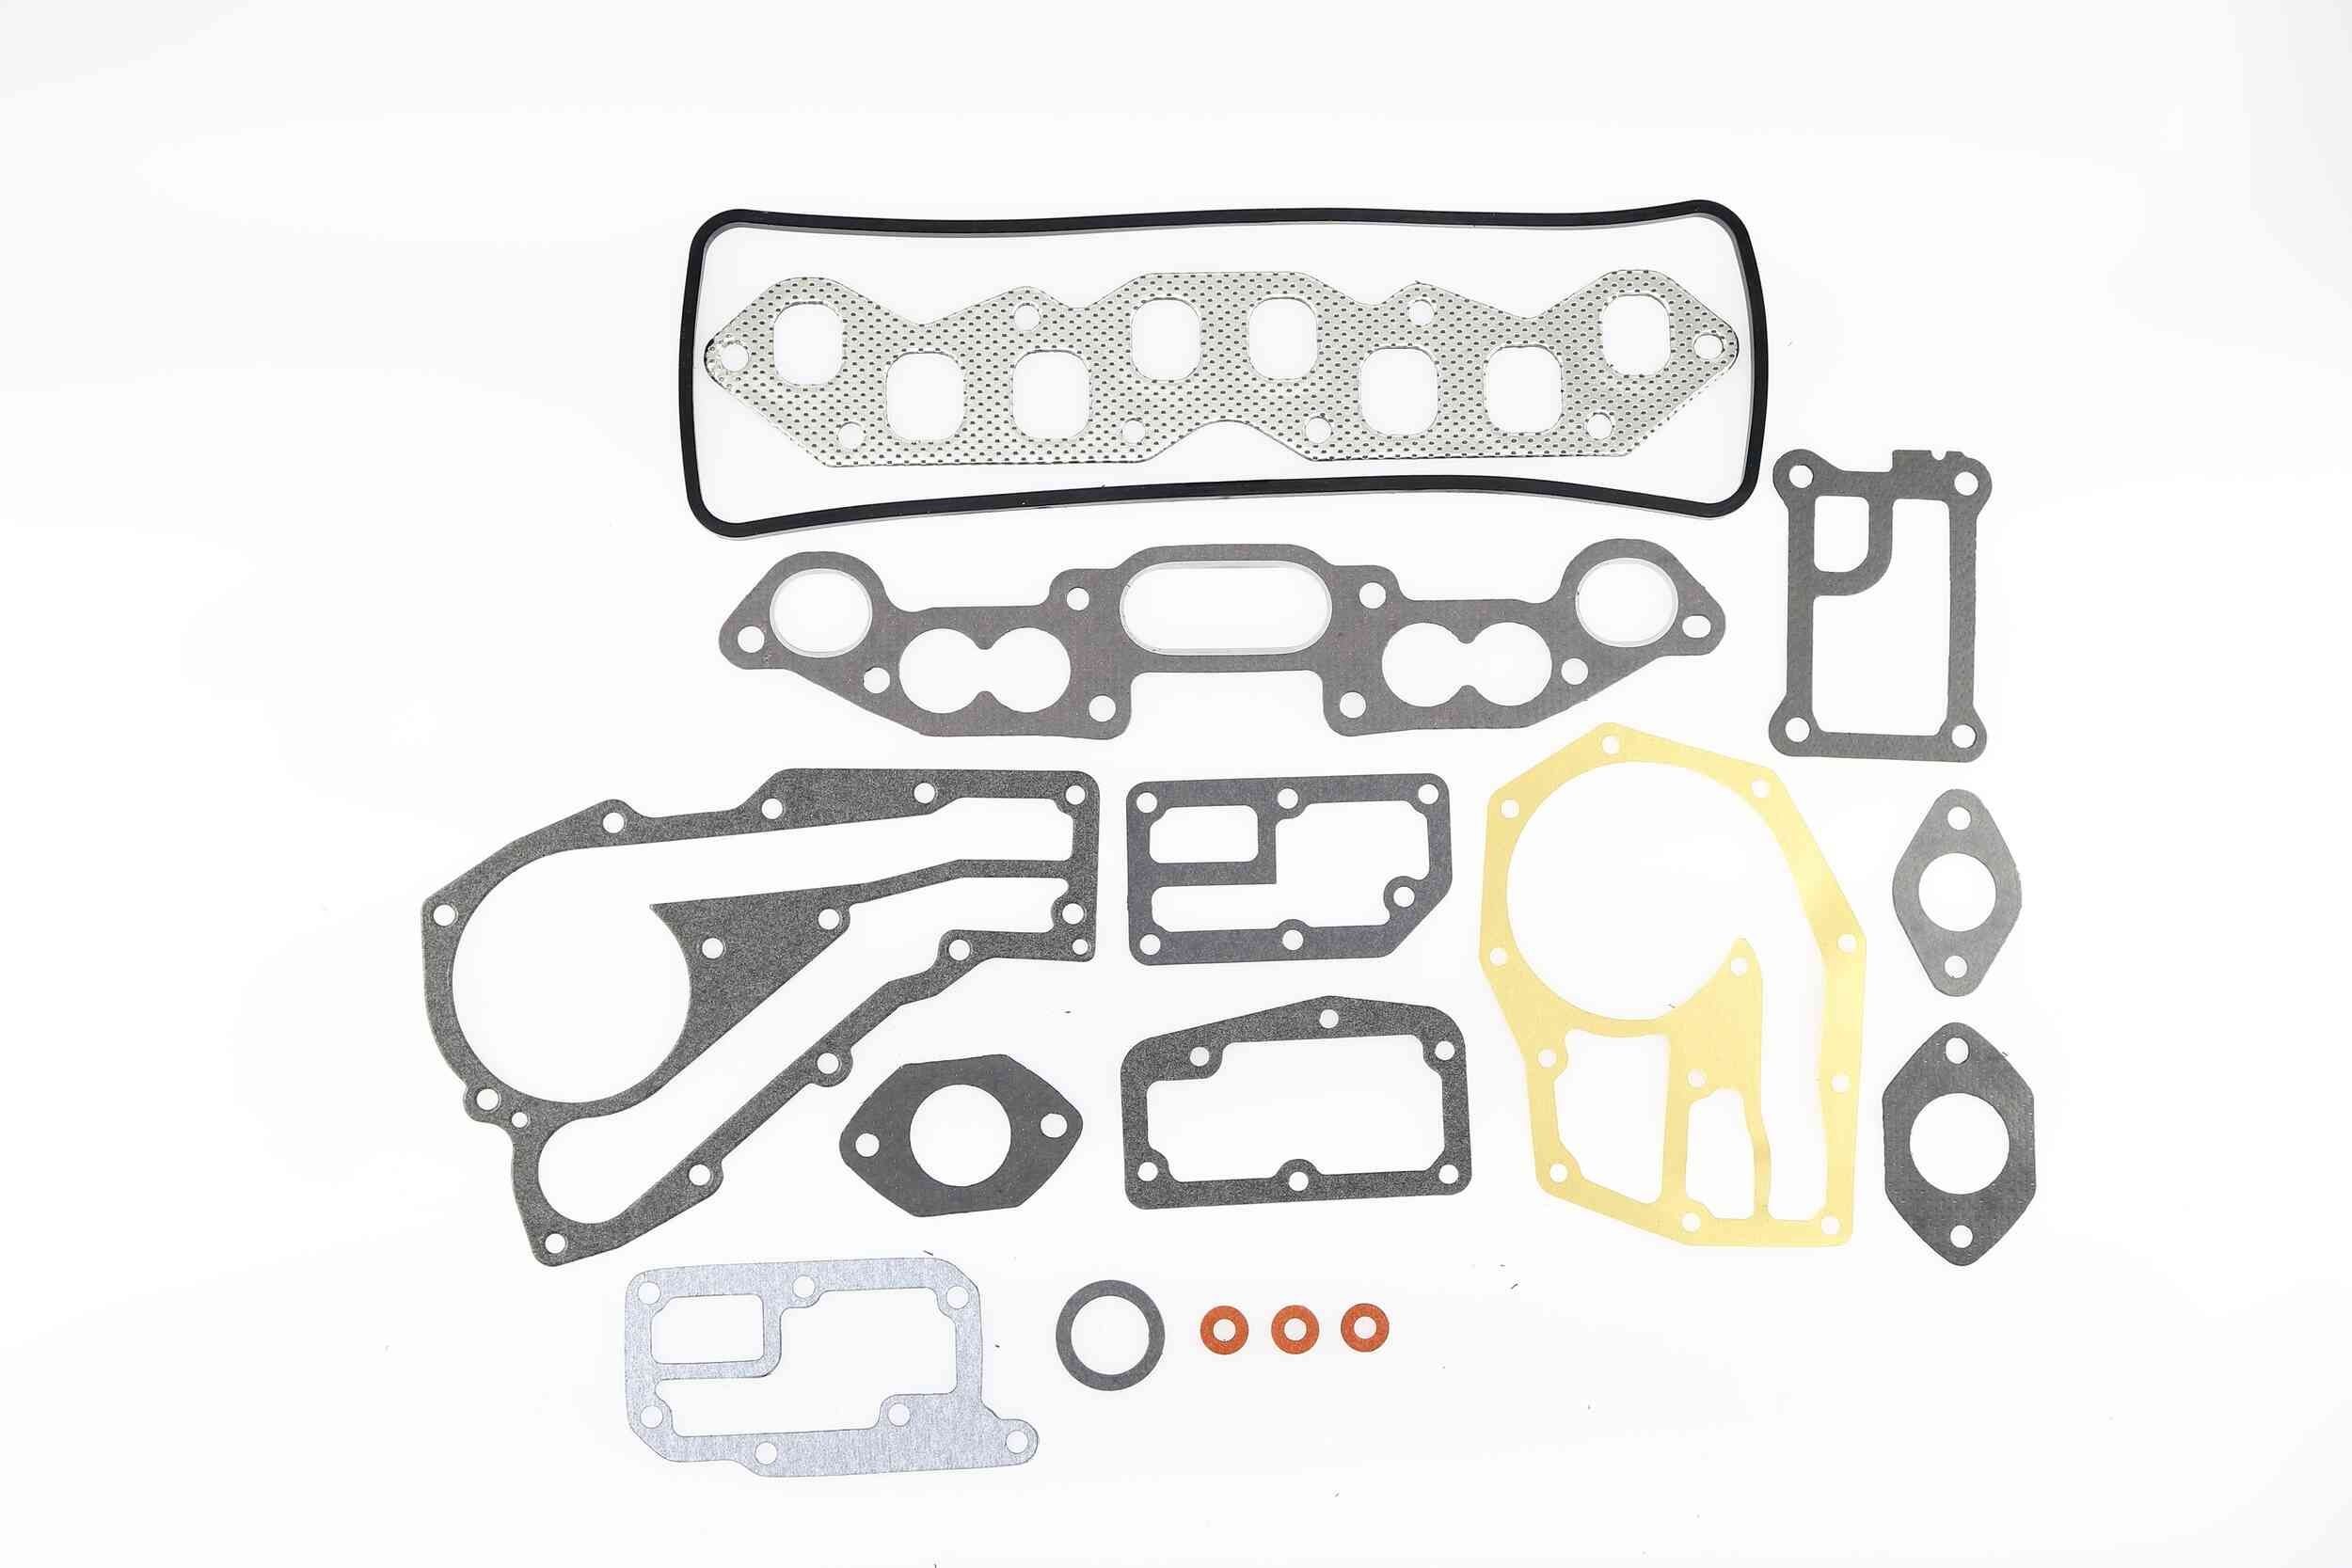 83417582 CORTECO without cylinder head gasket, without camshaft seal, without valve stem seals, with valve cover gasket Head gasket kit 417582P buy